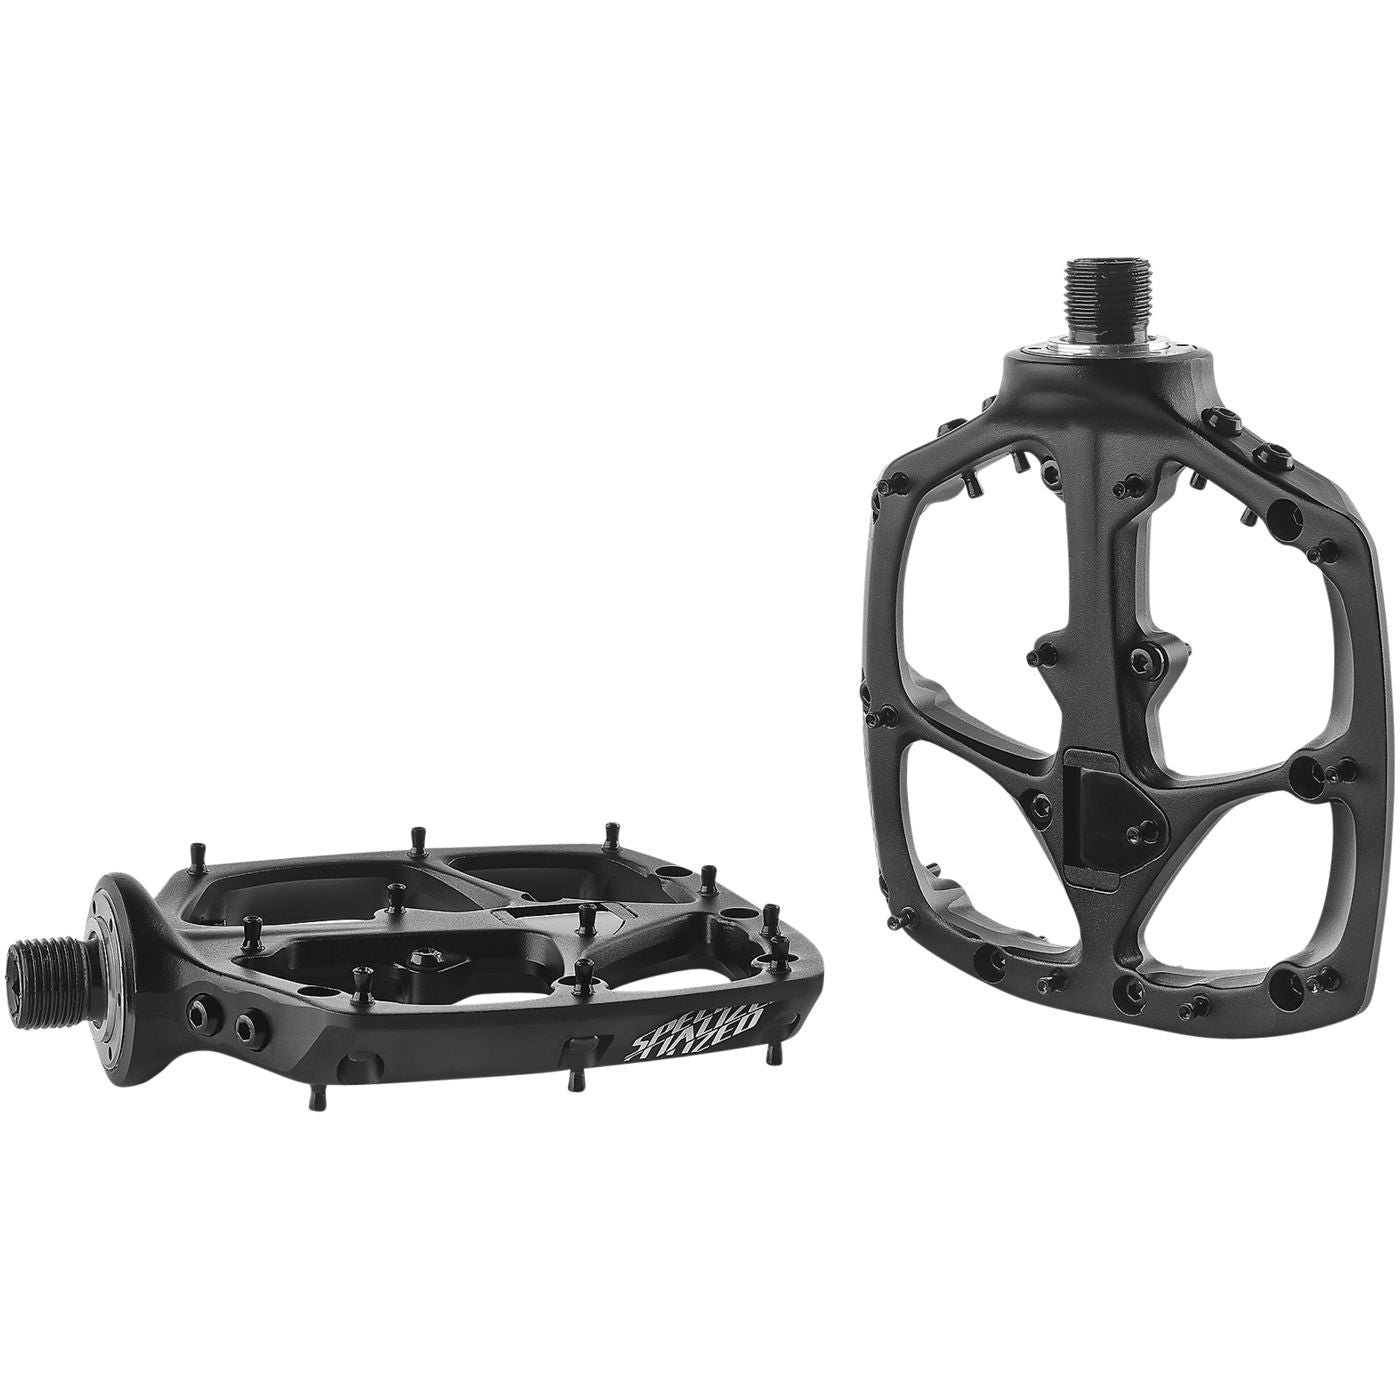 Specialized Boomslang Platform Pedals - Pedals - Bicycle Warehouse